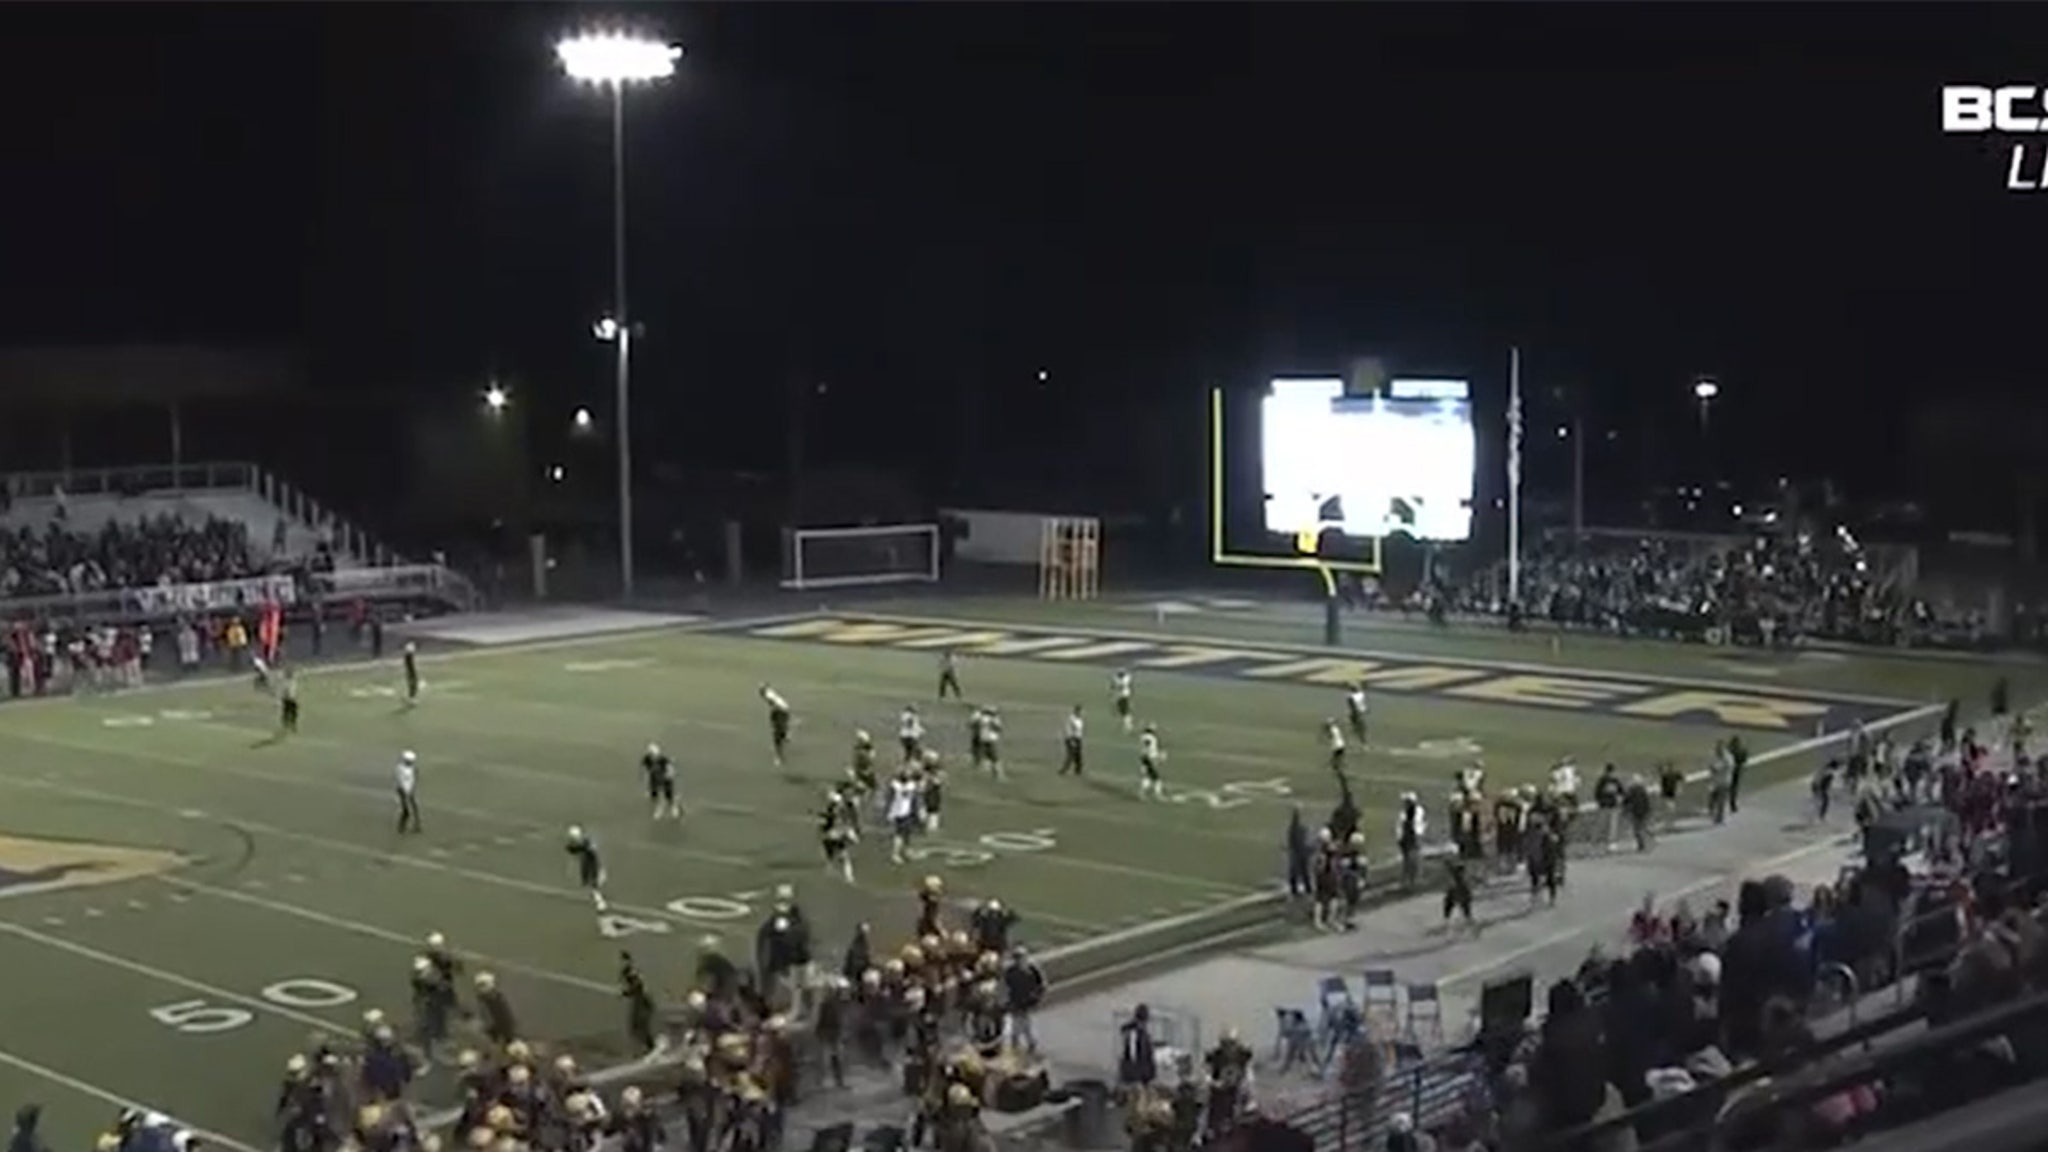 Crowd Flees As 3 People Are Shot At Televised High School Football Game thumbnail